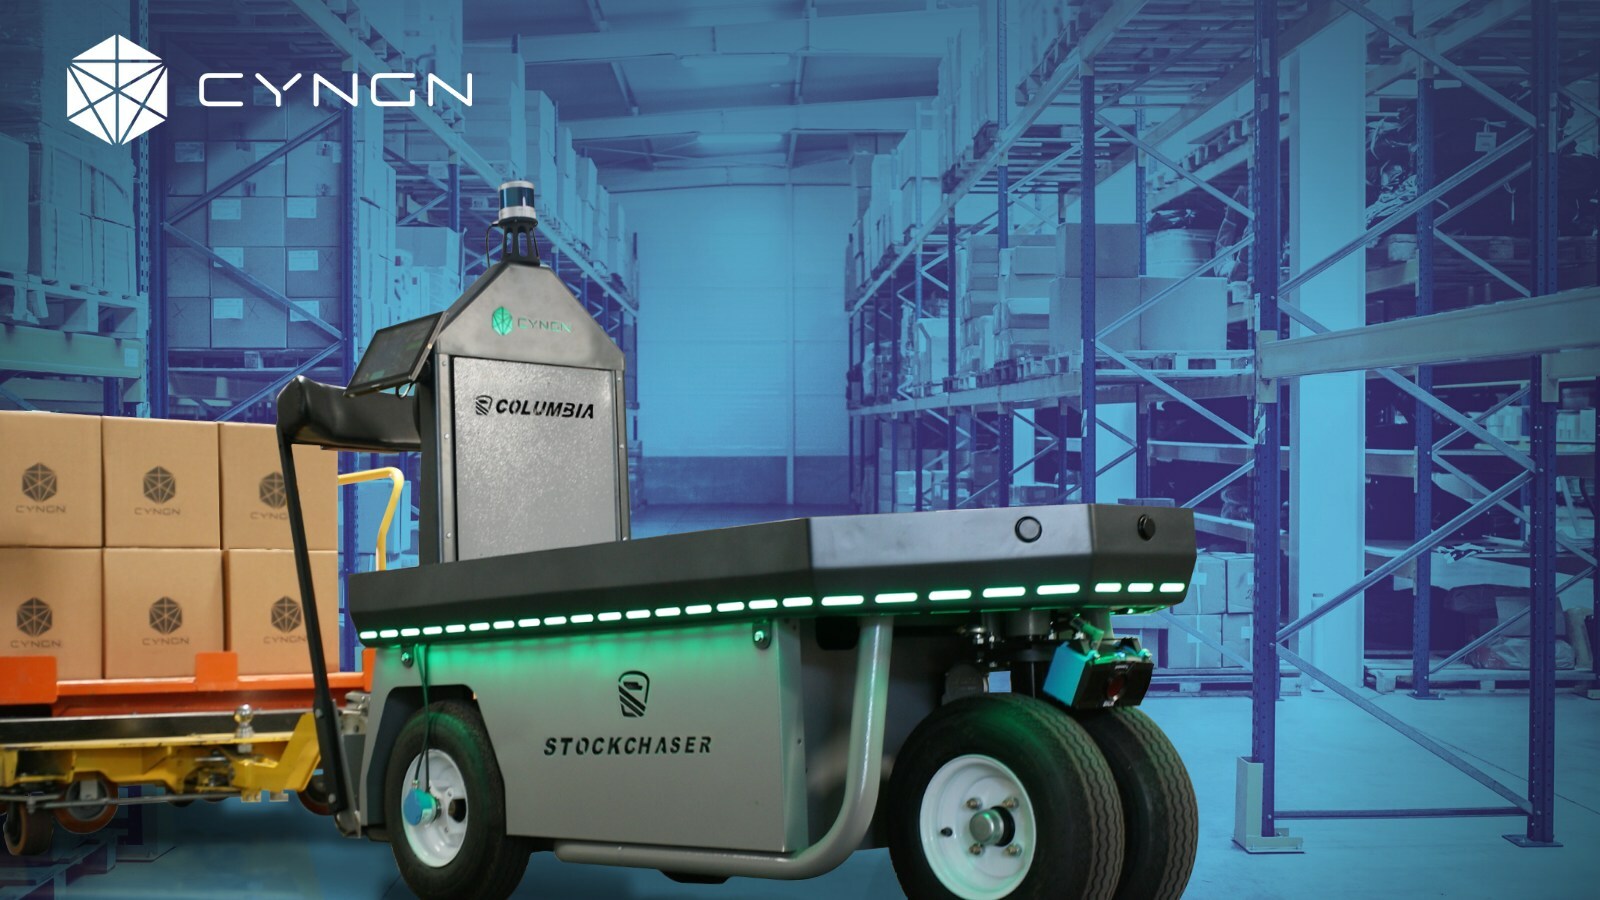 Cyngn Launches Paid Deployment with Fortune 100 Heavy Equipment Manufacturer in North American Facility